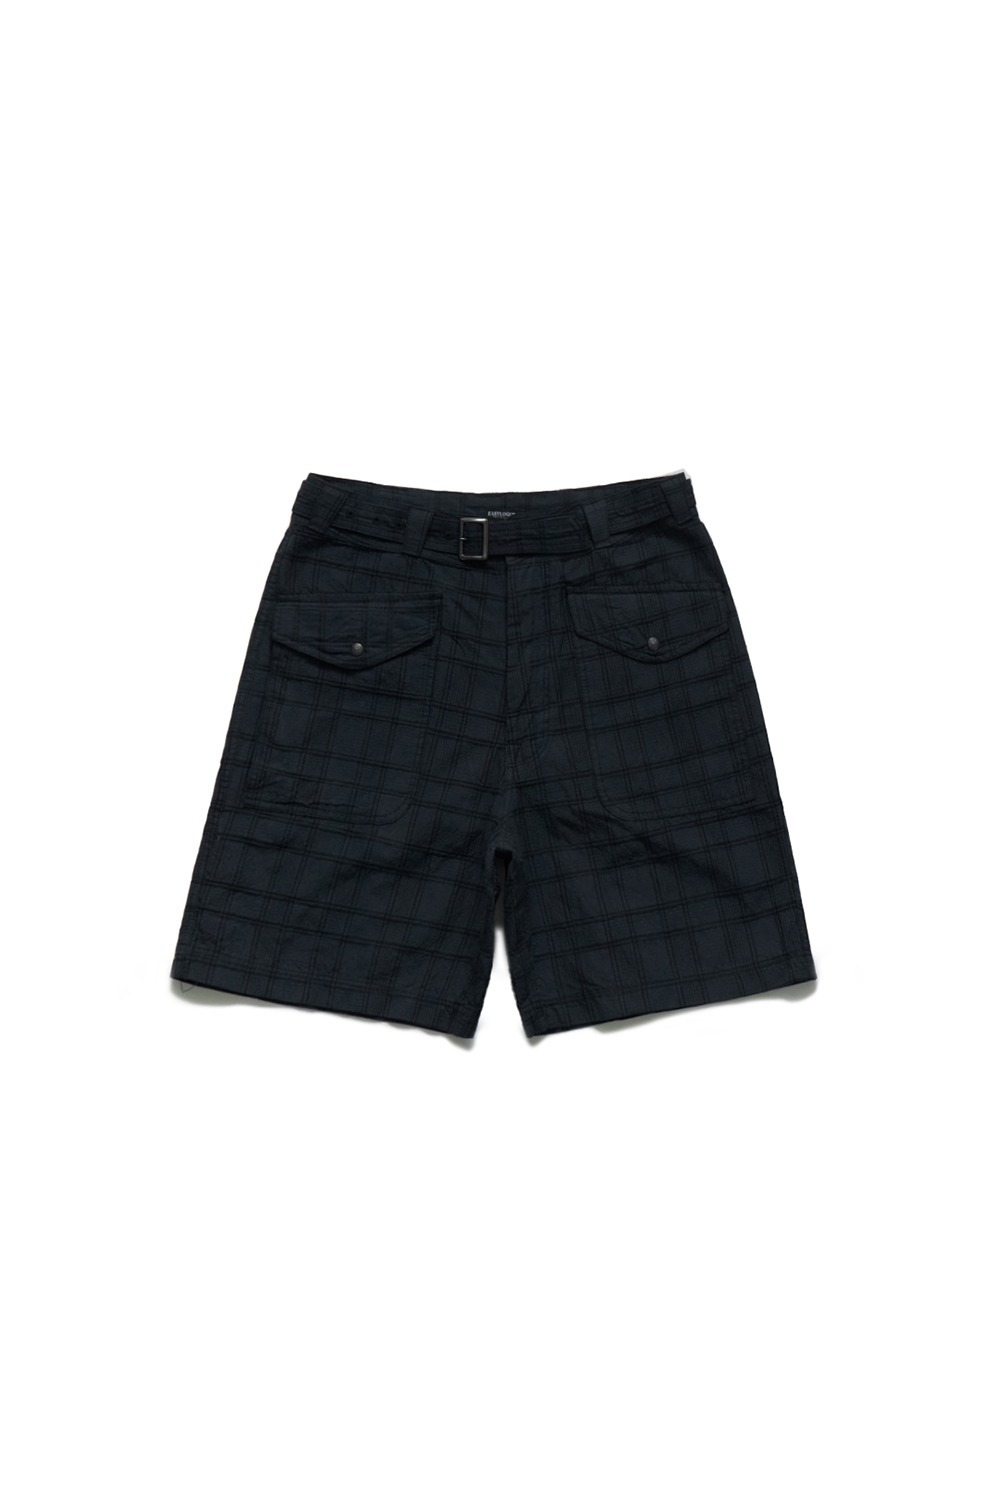 AIRFORCE BELTED SHORTS / BLACK GREY CHECK